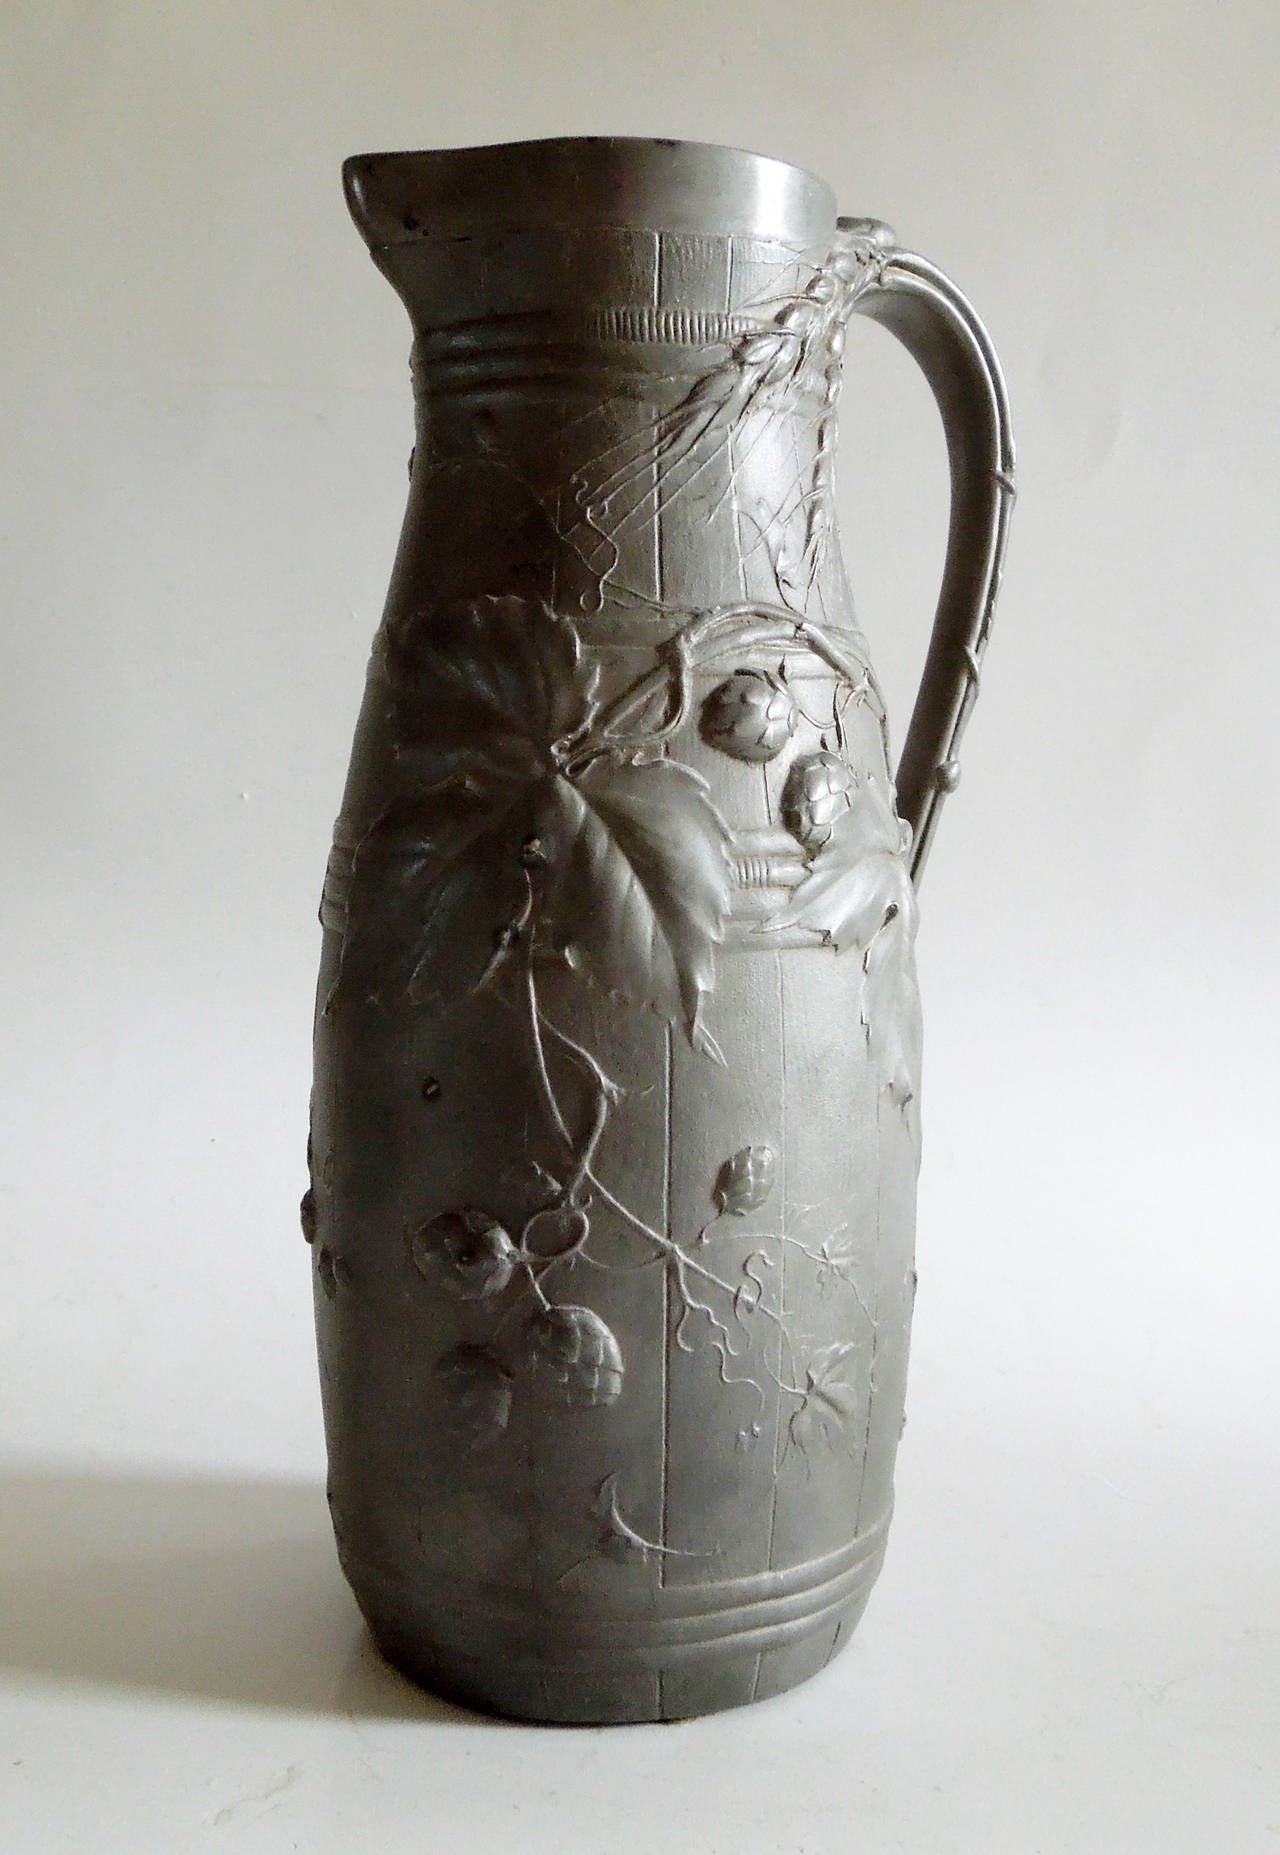 A French beer or water jug with naturalist decoration of barley and hops. The model for this jug was created in 1897.

Jules Brateau (1844-1923) was a silversmith of exceptional talent, and began his career working in gold for the more important